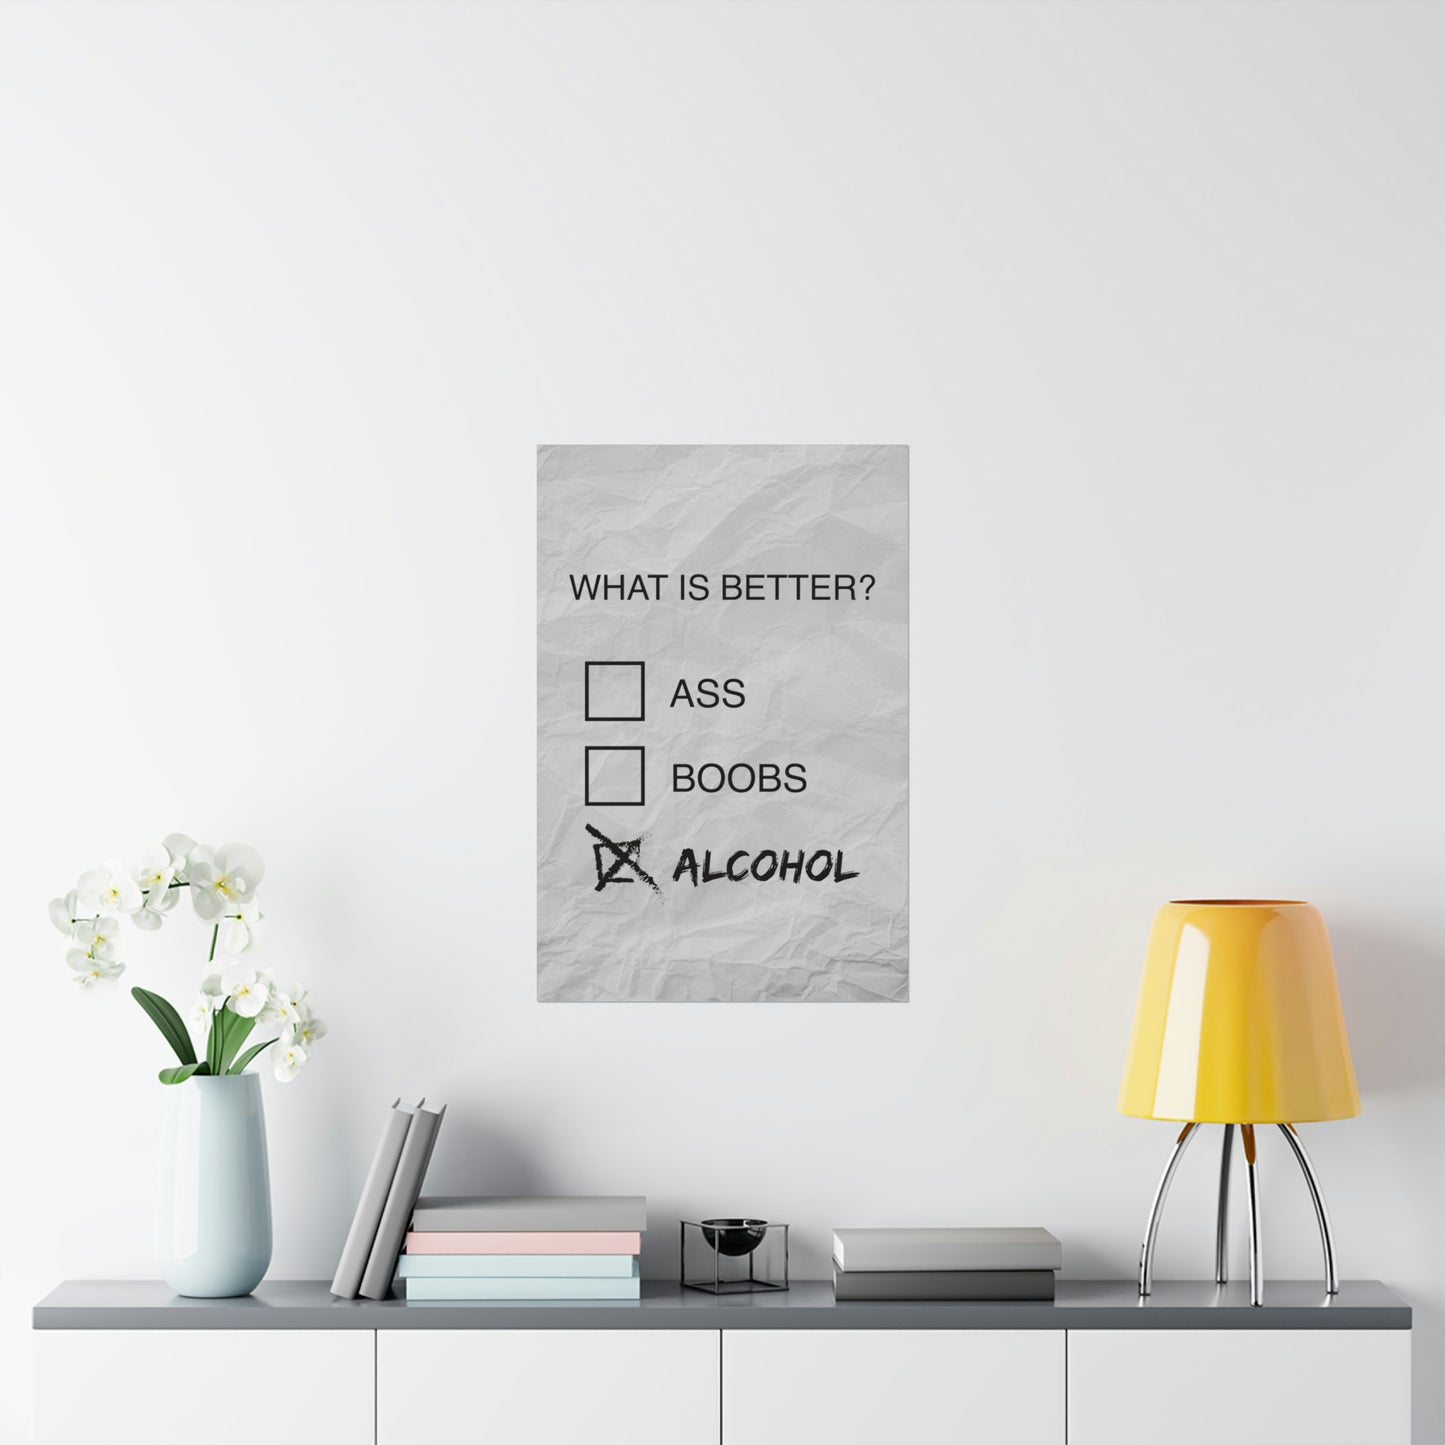 Alcohol is Always Better, College Poster